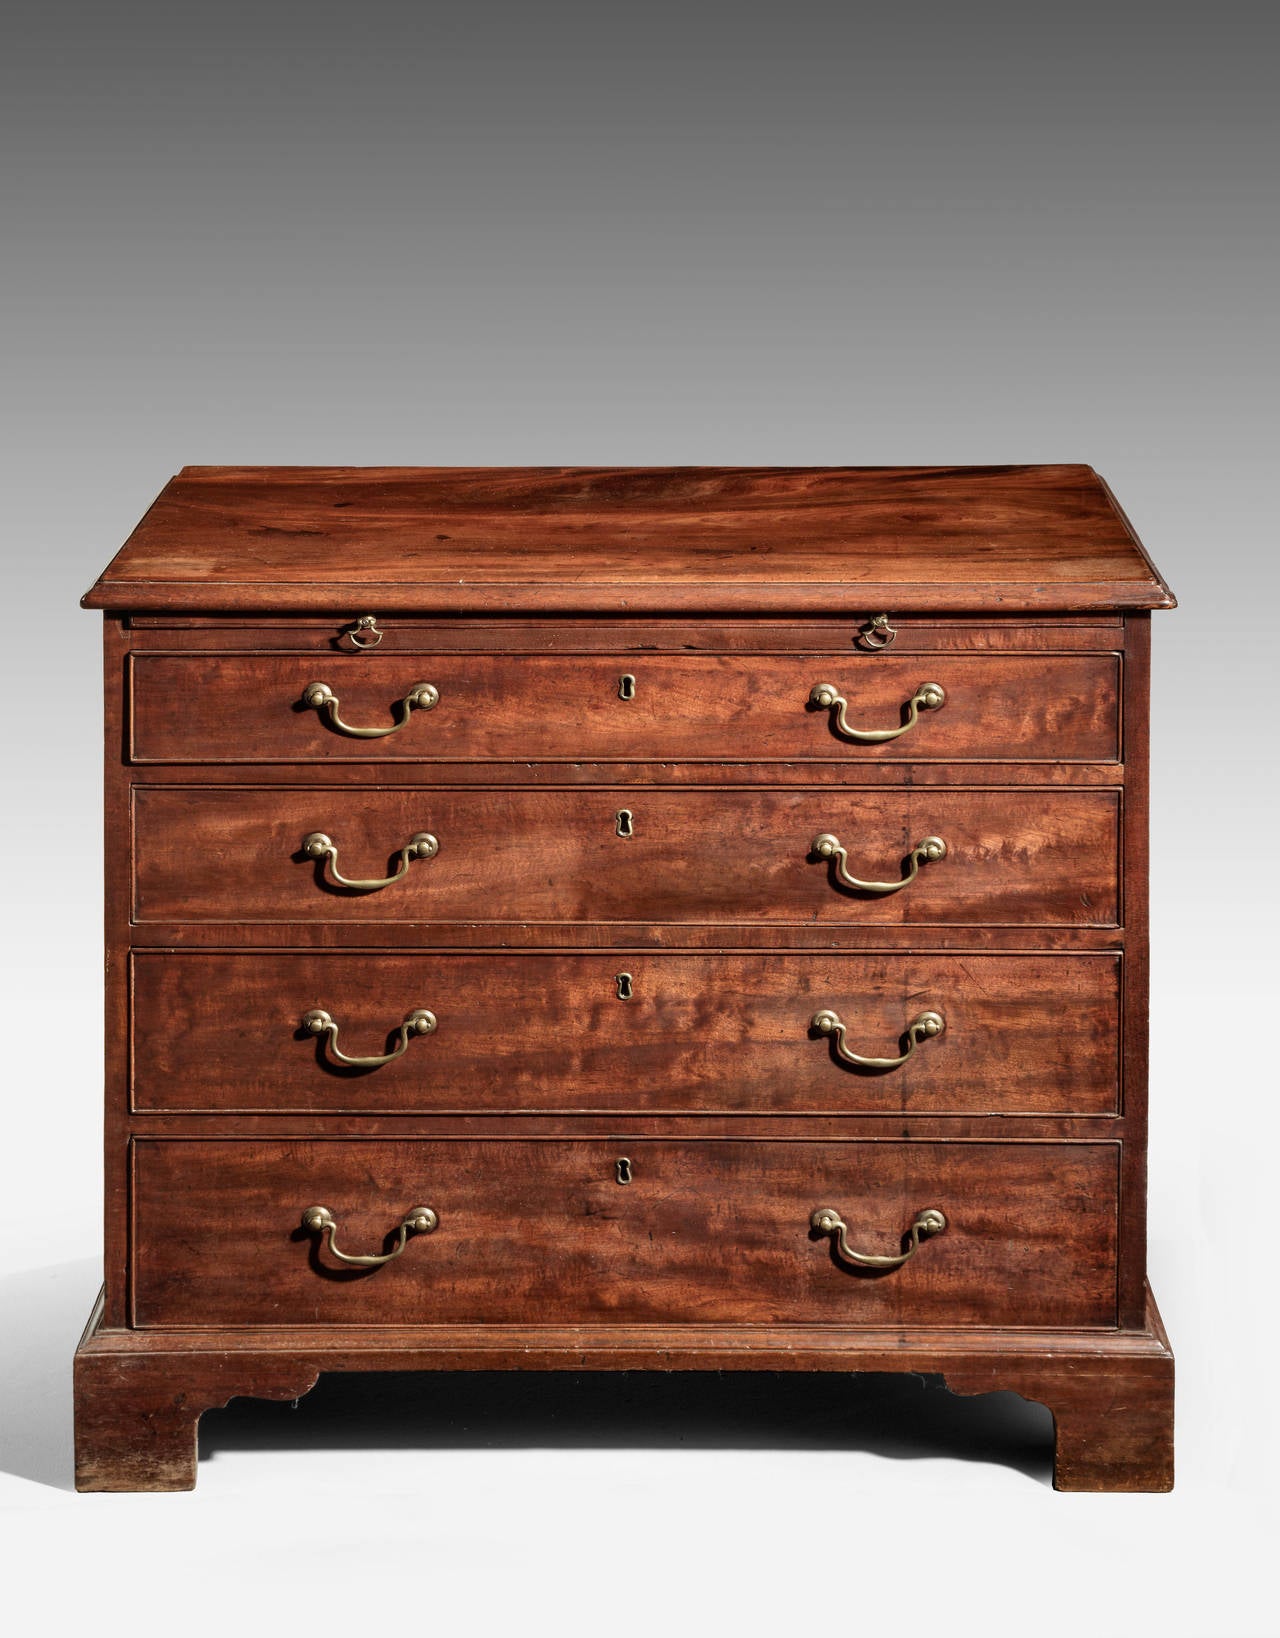 A very well figured George III period mahogany chest of drawers with good period swan necked handles. The top section incorporating a slide. Very highly figured top. Period bracket feet.